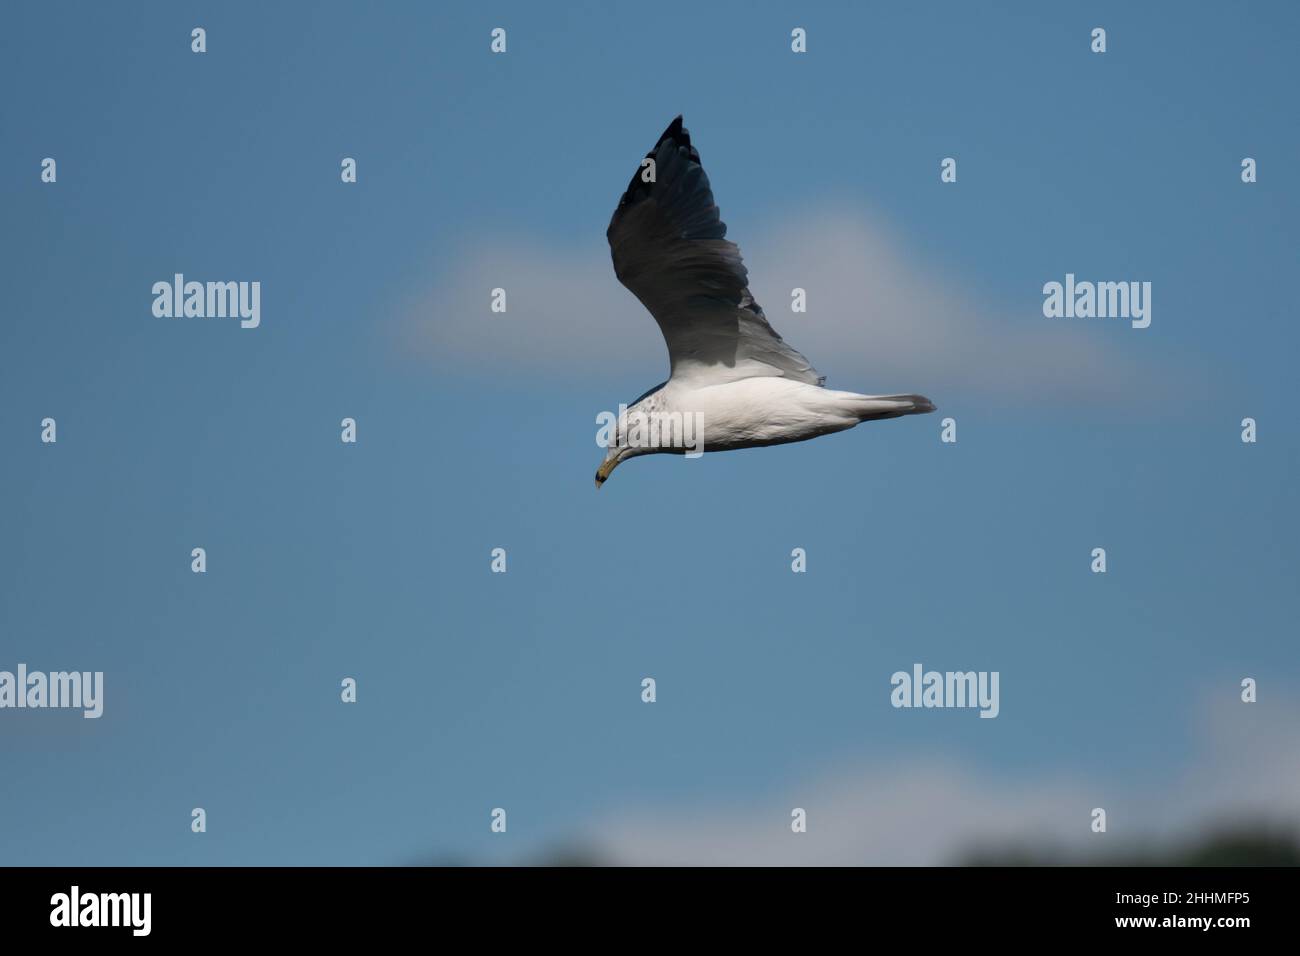 Gull flying through the cloudy sky in New York Stock Photo